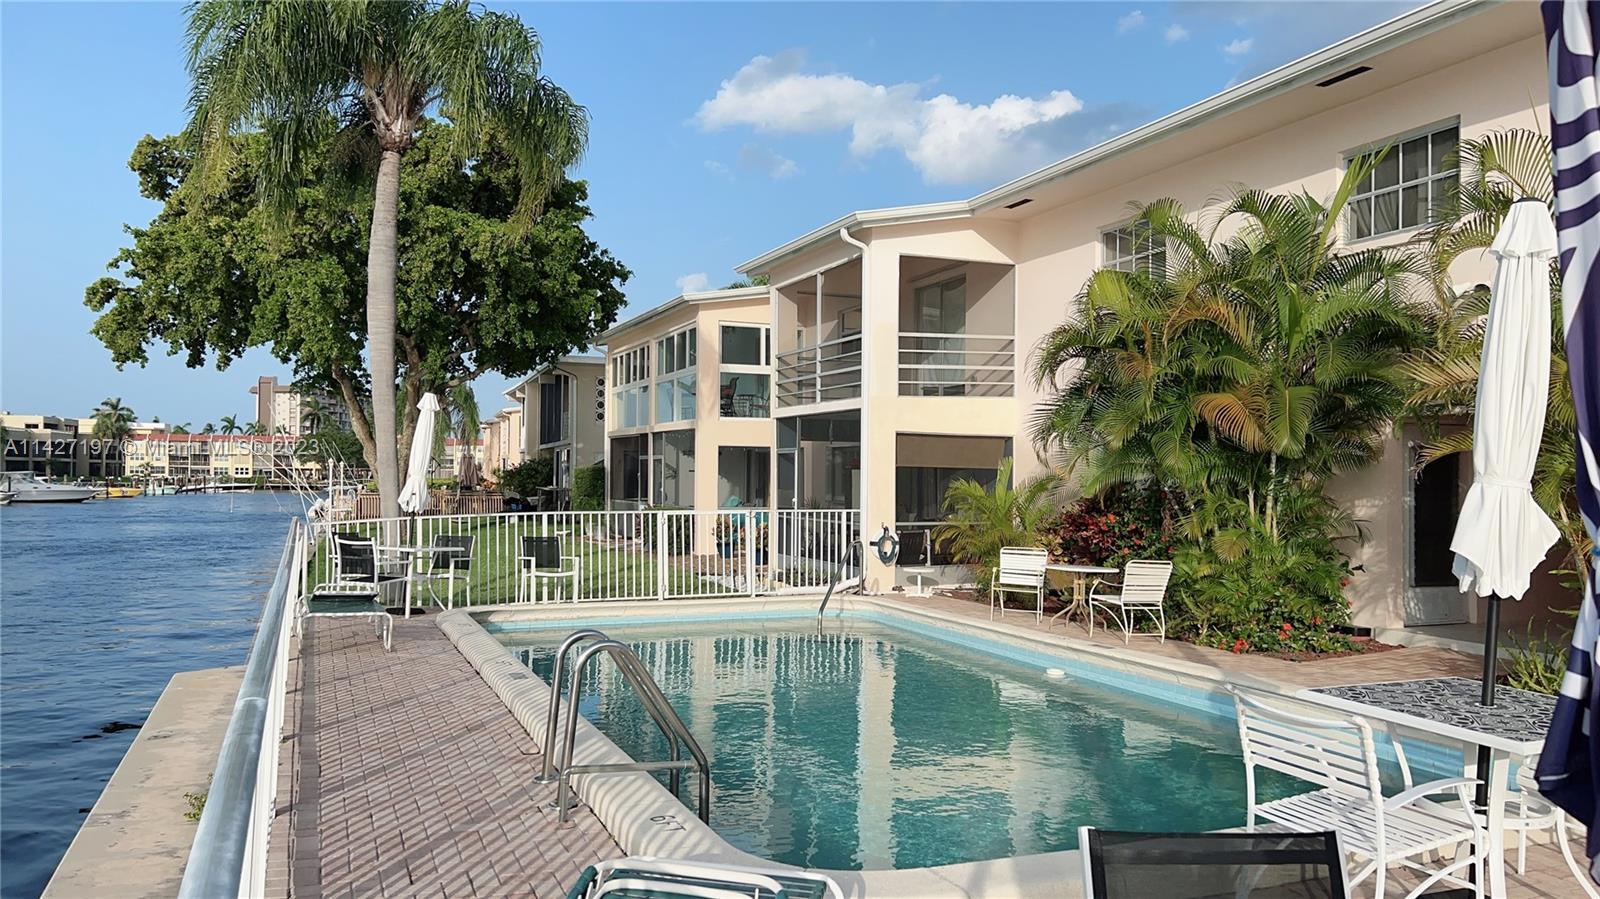 Beautiful 55+ Boutique Building, first floor unit, 2 bedrooms, 1 bath in the heart of Pompano Beach.